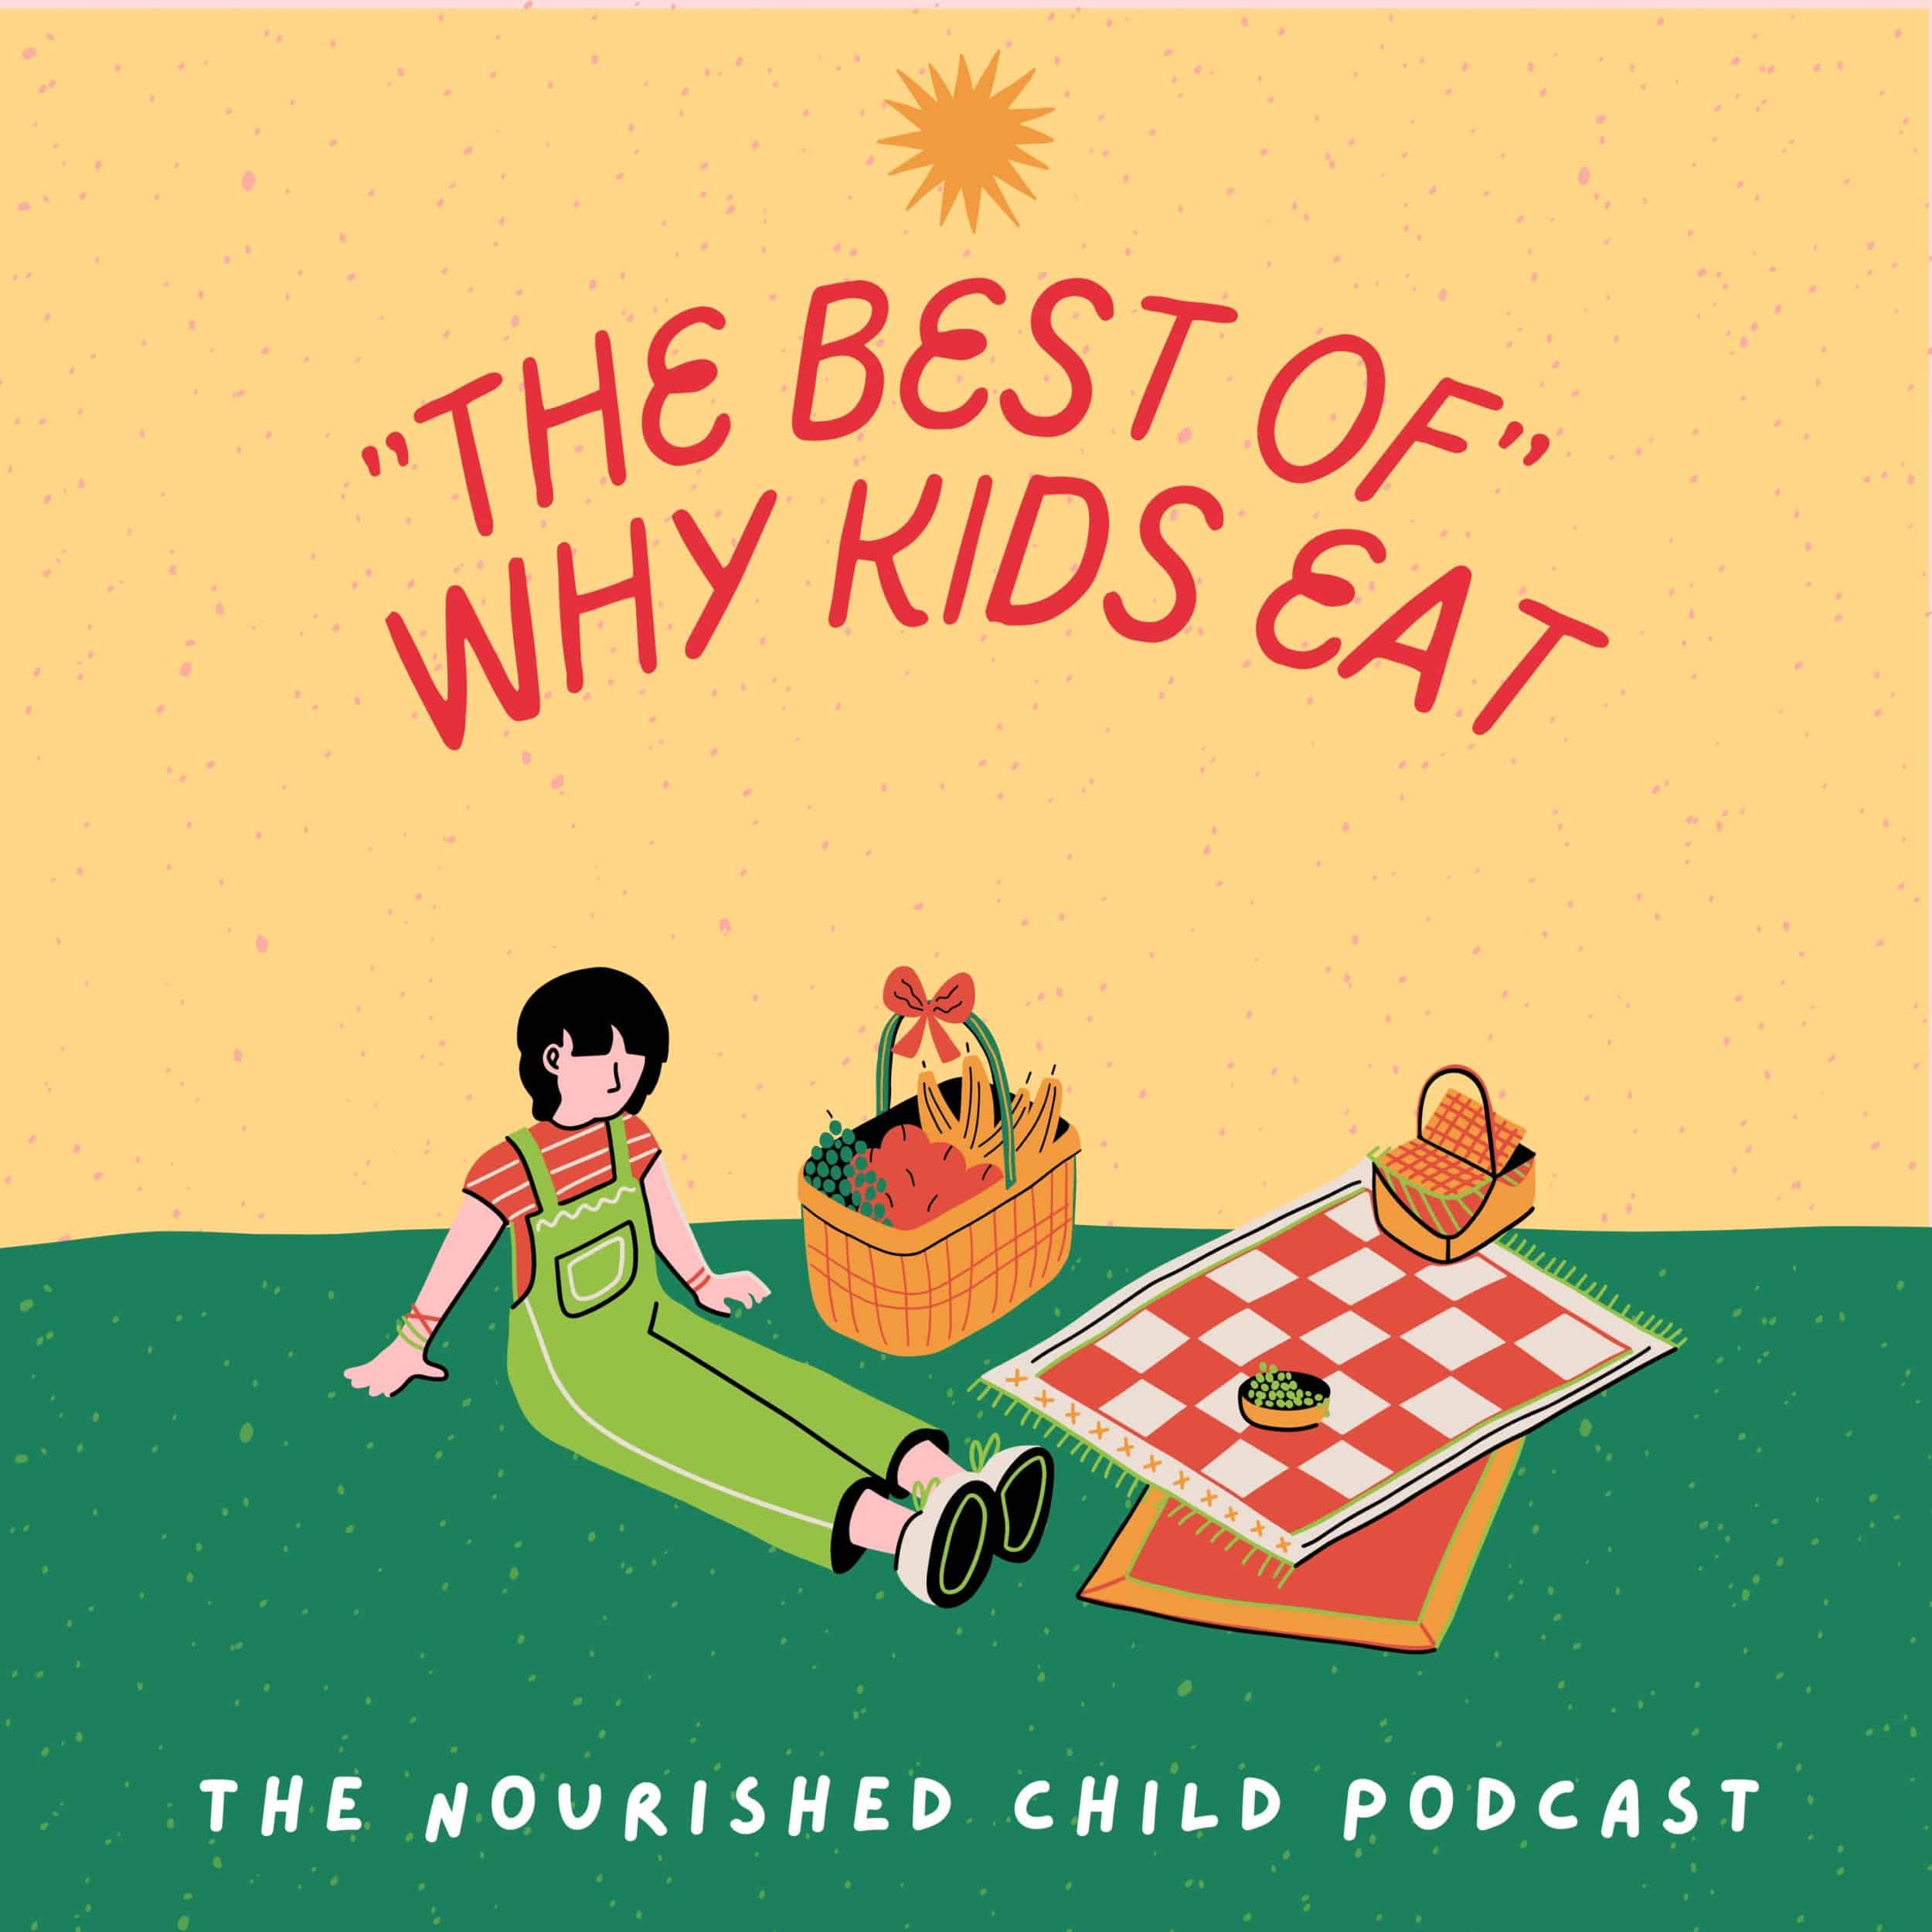 The Nourished Child podcast